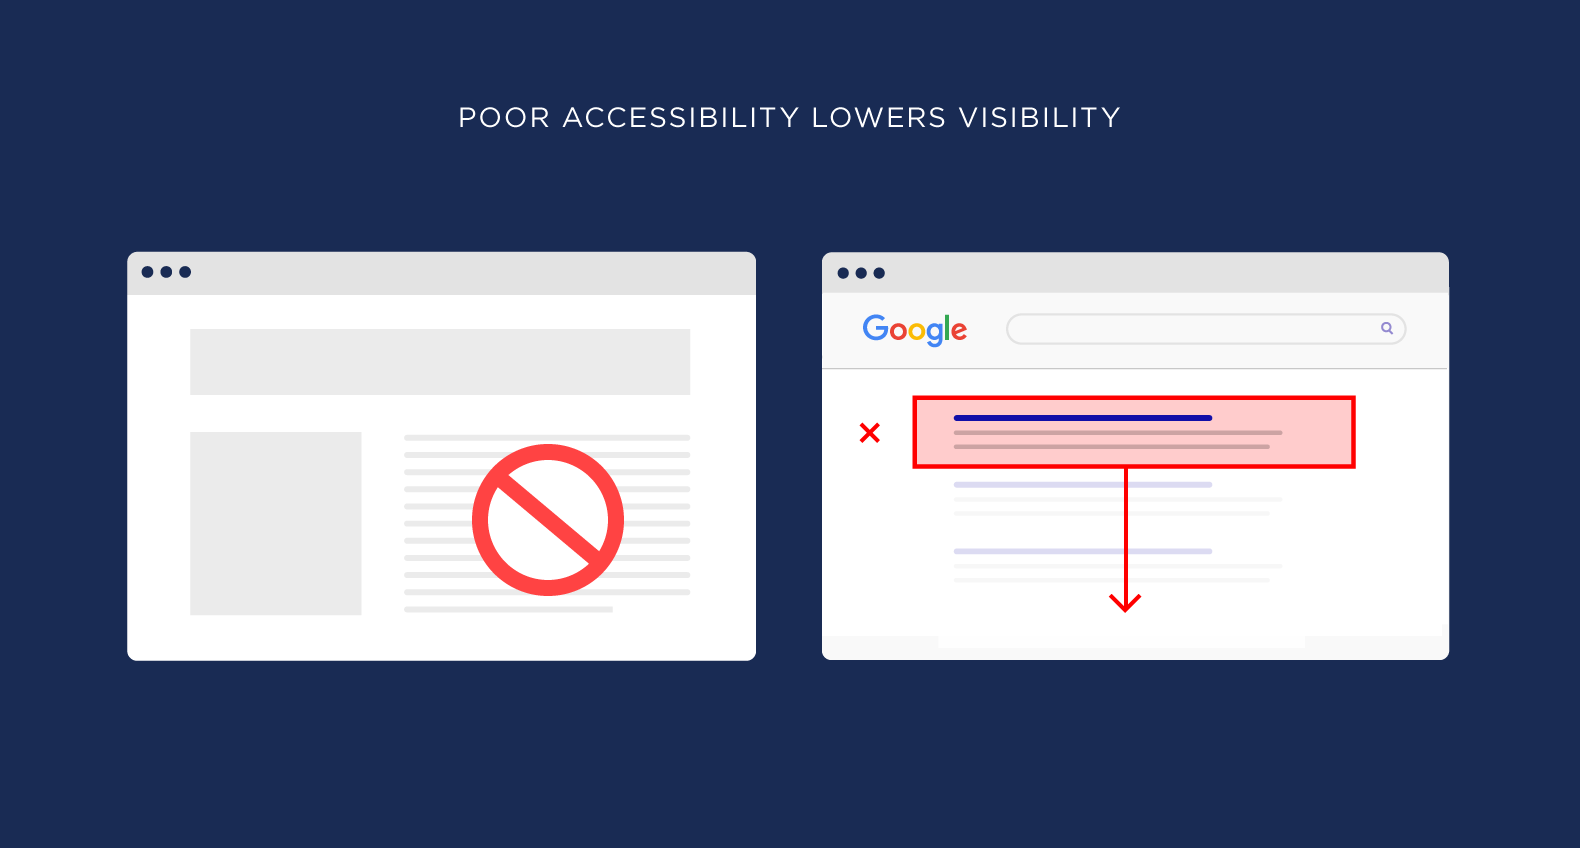 Poor accessibility lowers visibility